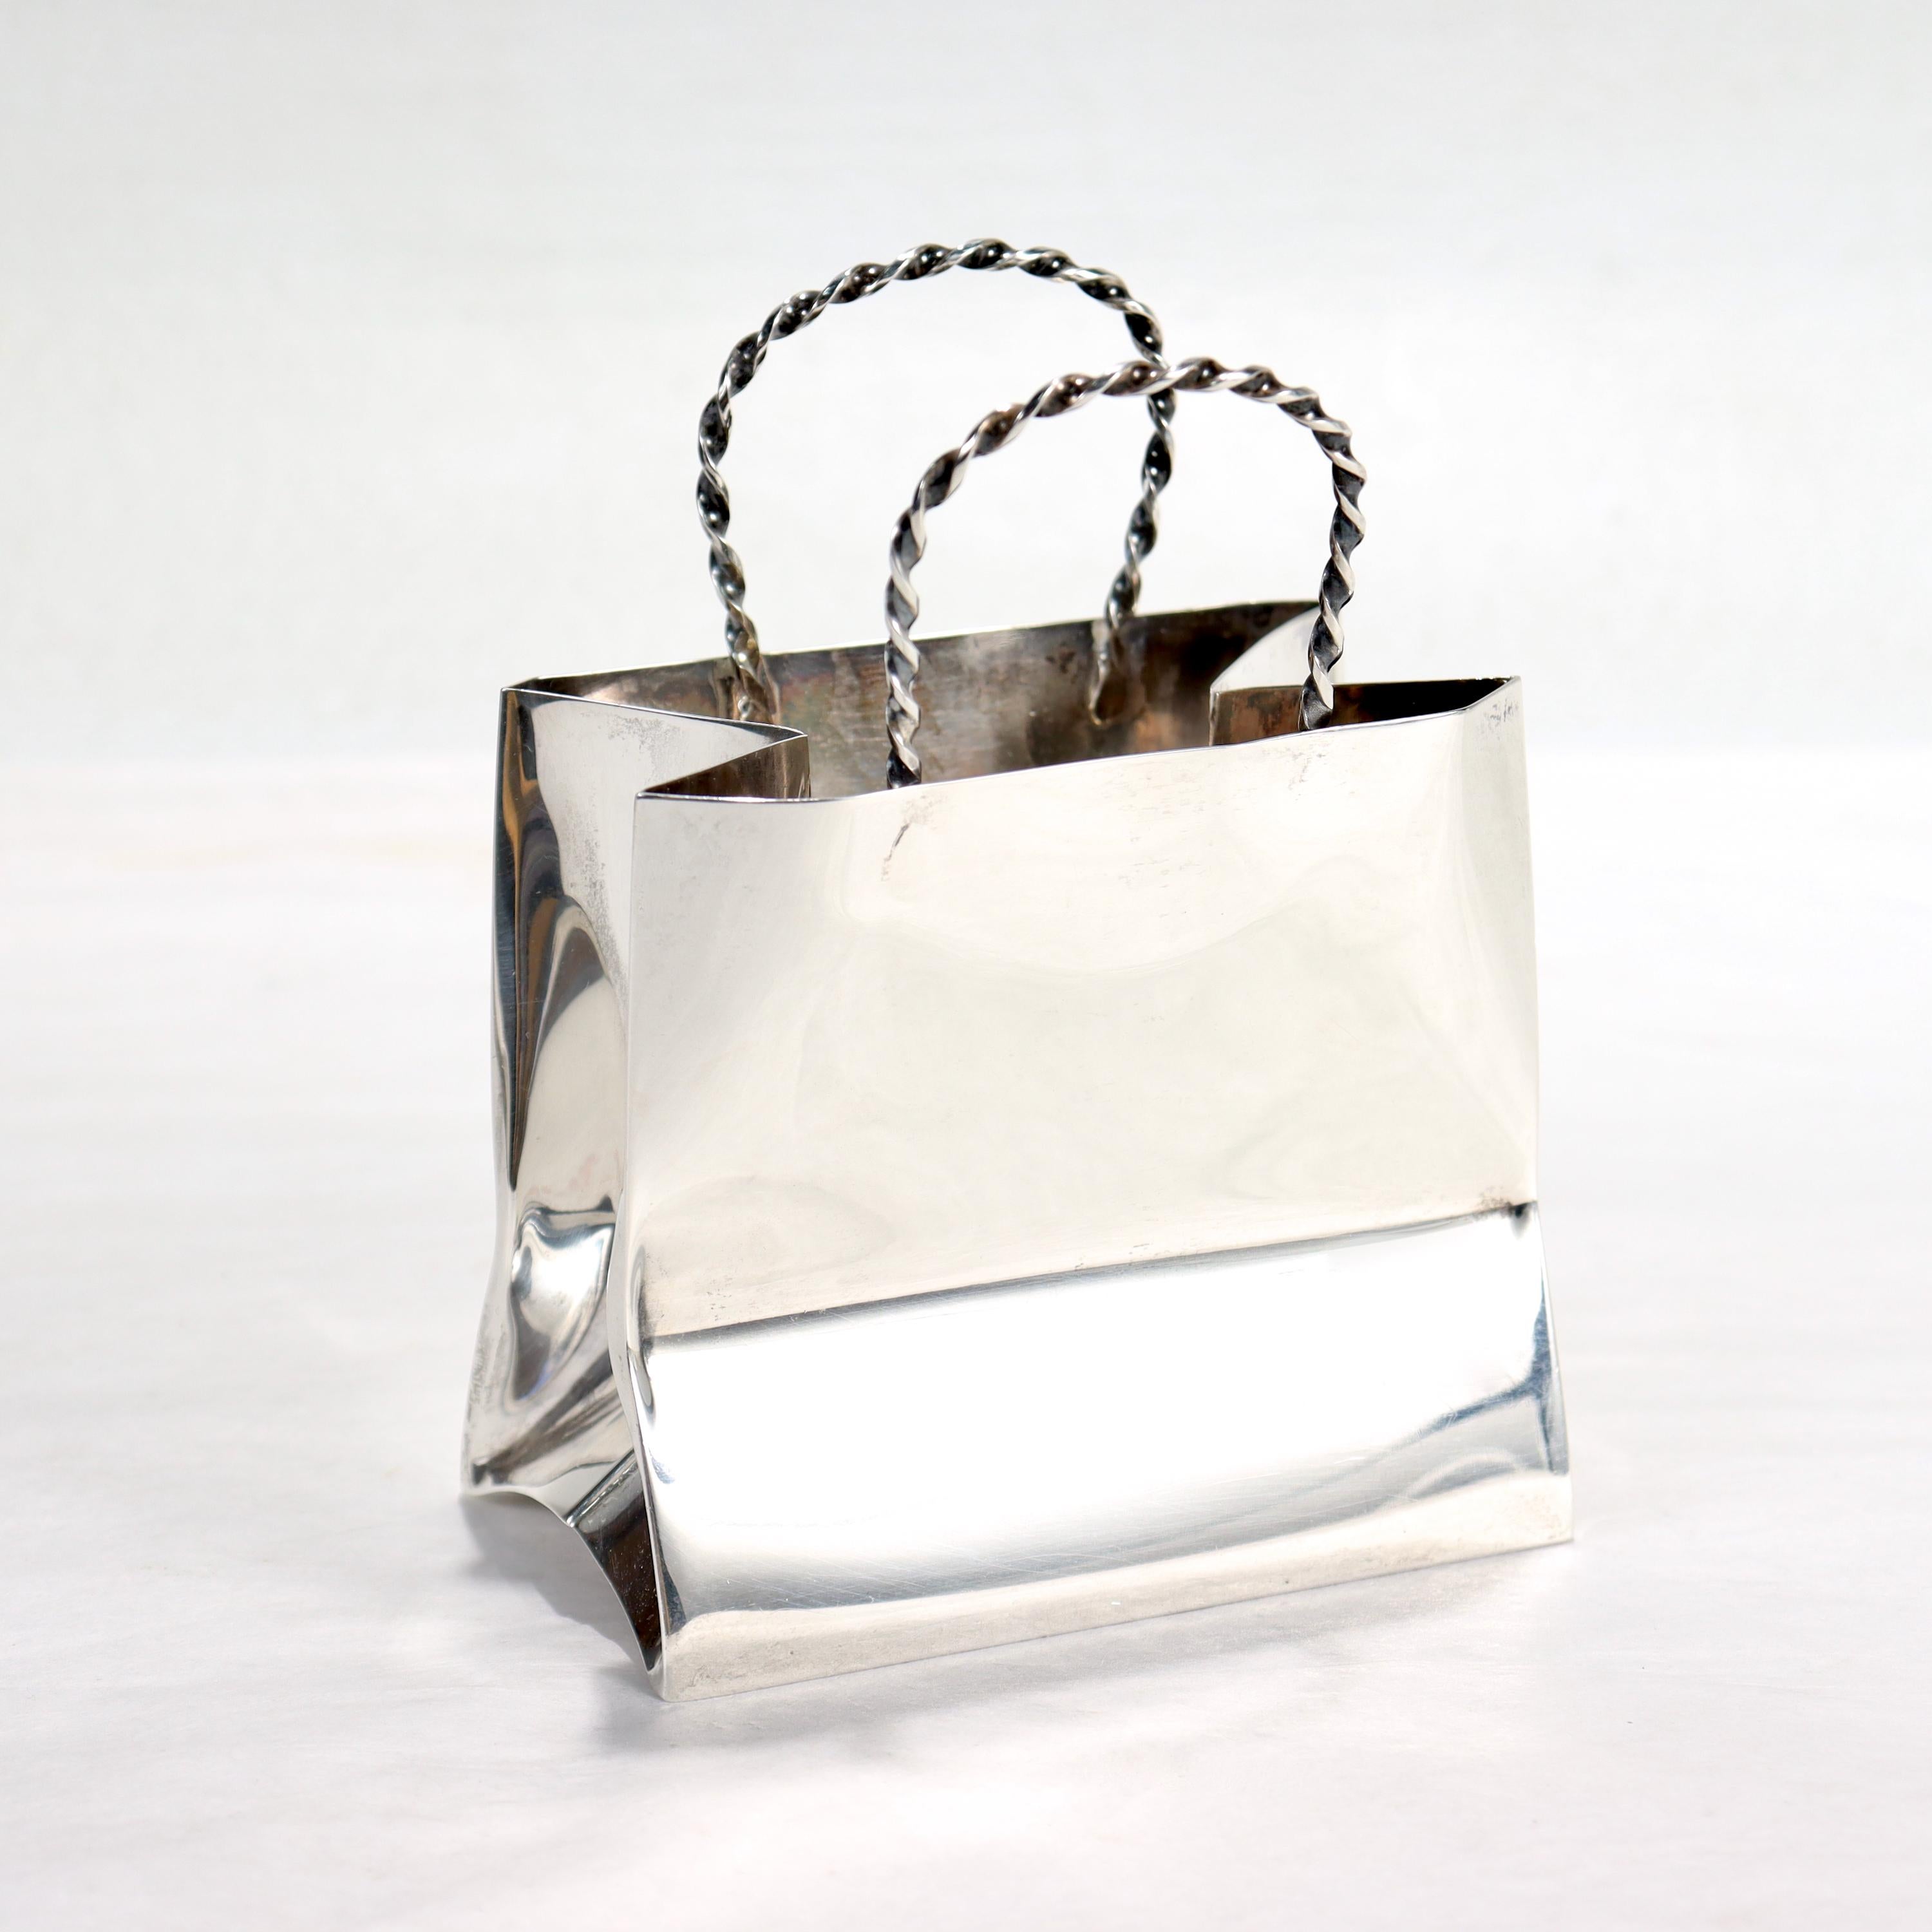 A fine vintage miniature shopping or gift bag.

By Cartier.

In sterling silver.

With slightly crumpled sides and braided handles

Perfect for the bar as a cocktail pick holder or on the vanity!

Date:
Mid to Late 20th Century

Overall